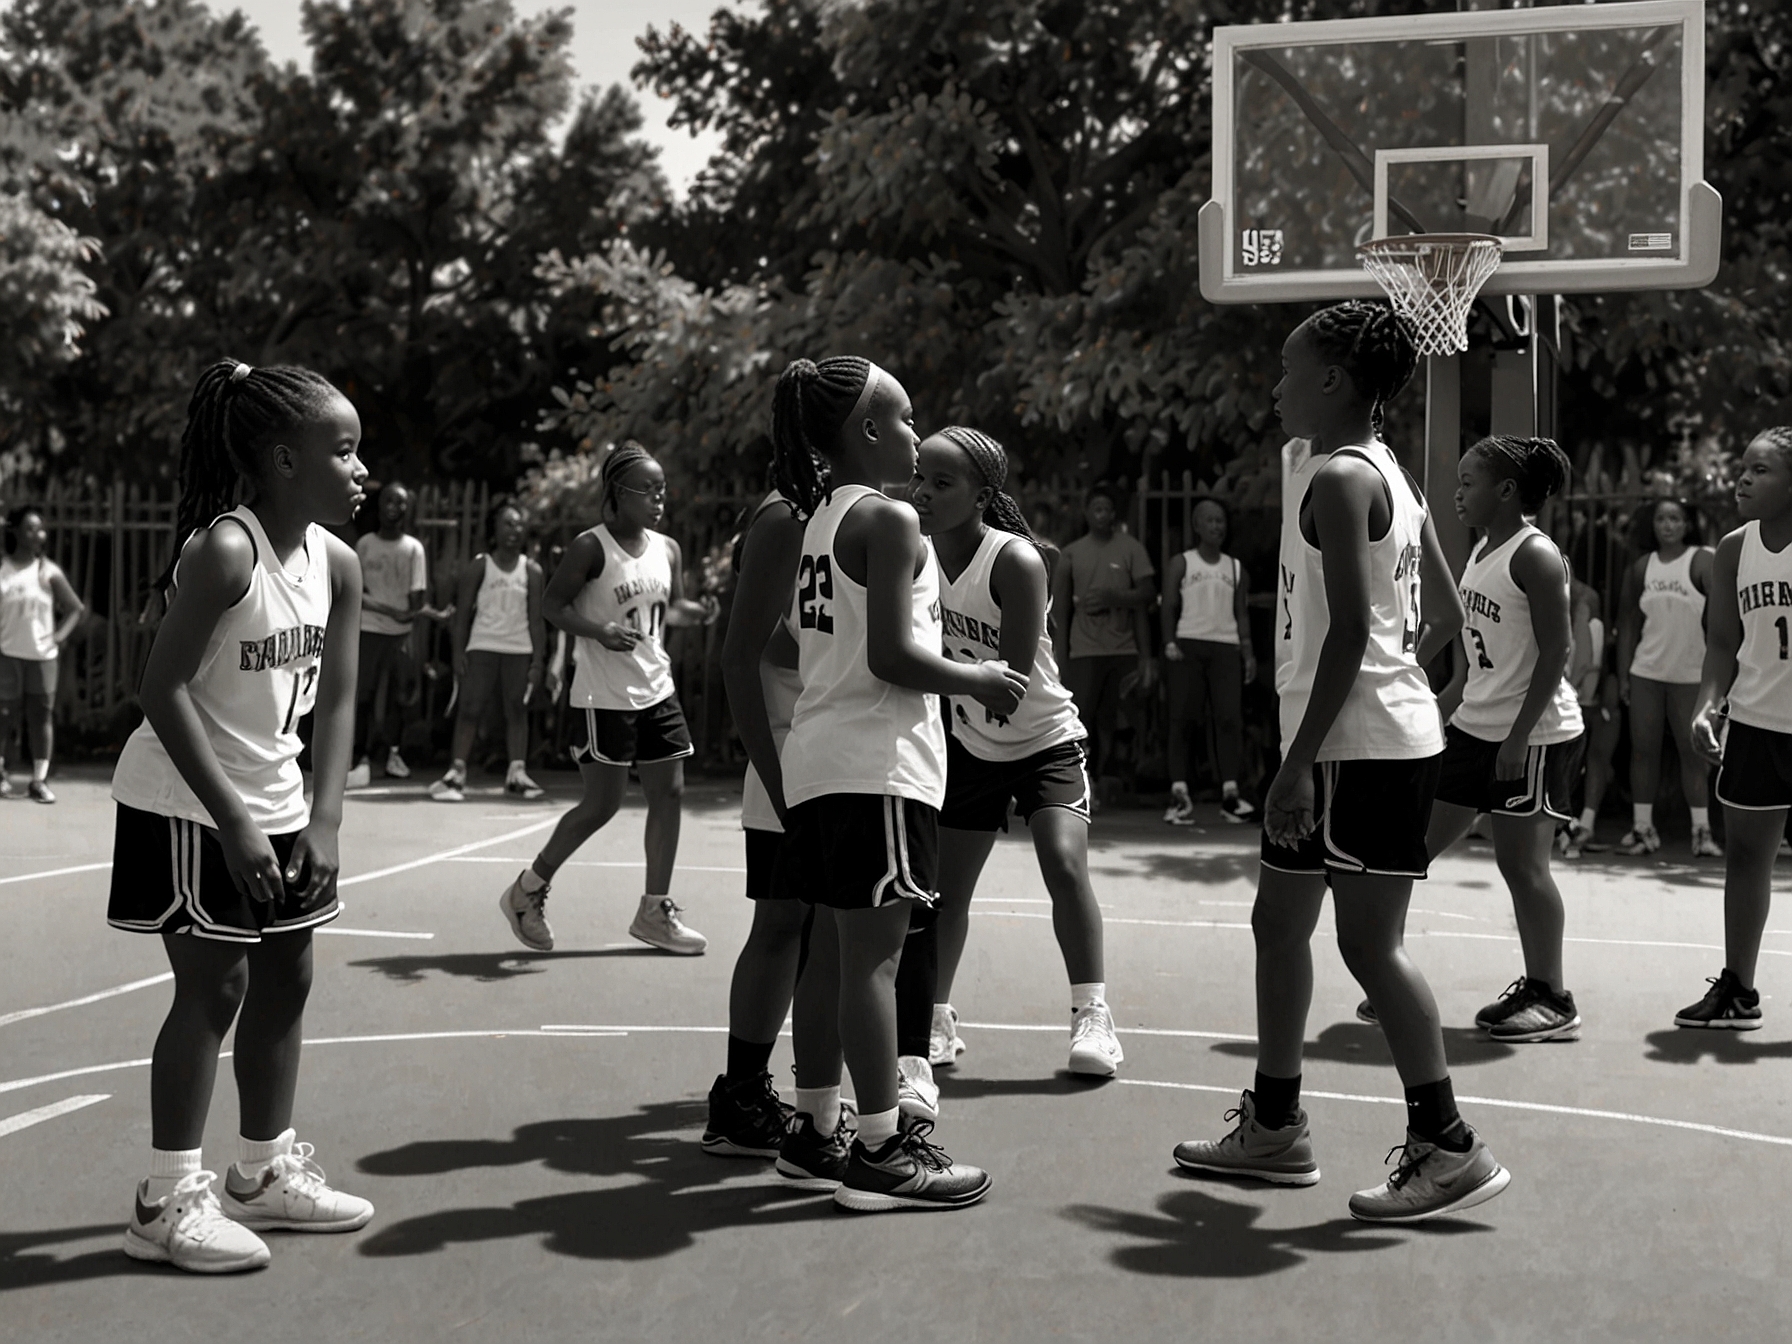 Young girls participating in a youth basketball clinic organized by HoopQueens, with professional players mentoring and guiding them, fostering the next generation of female basketball stars.